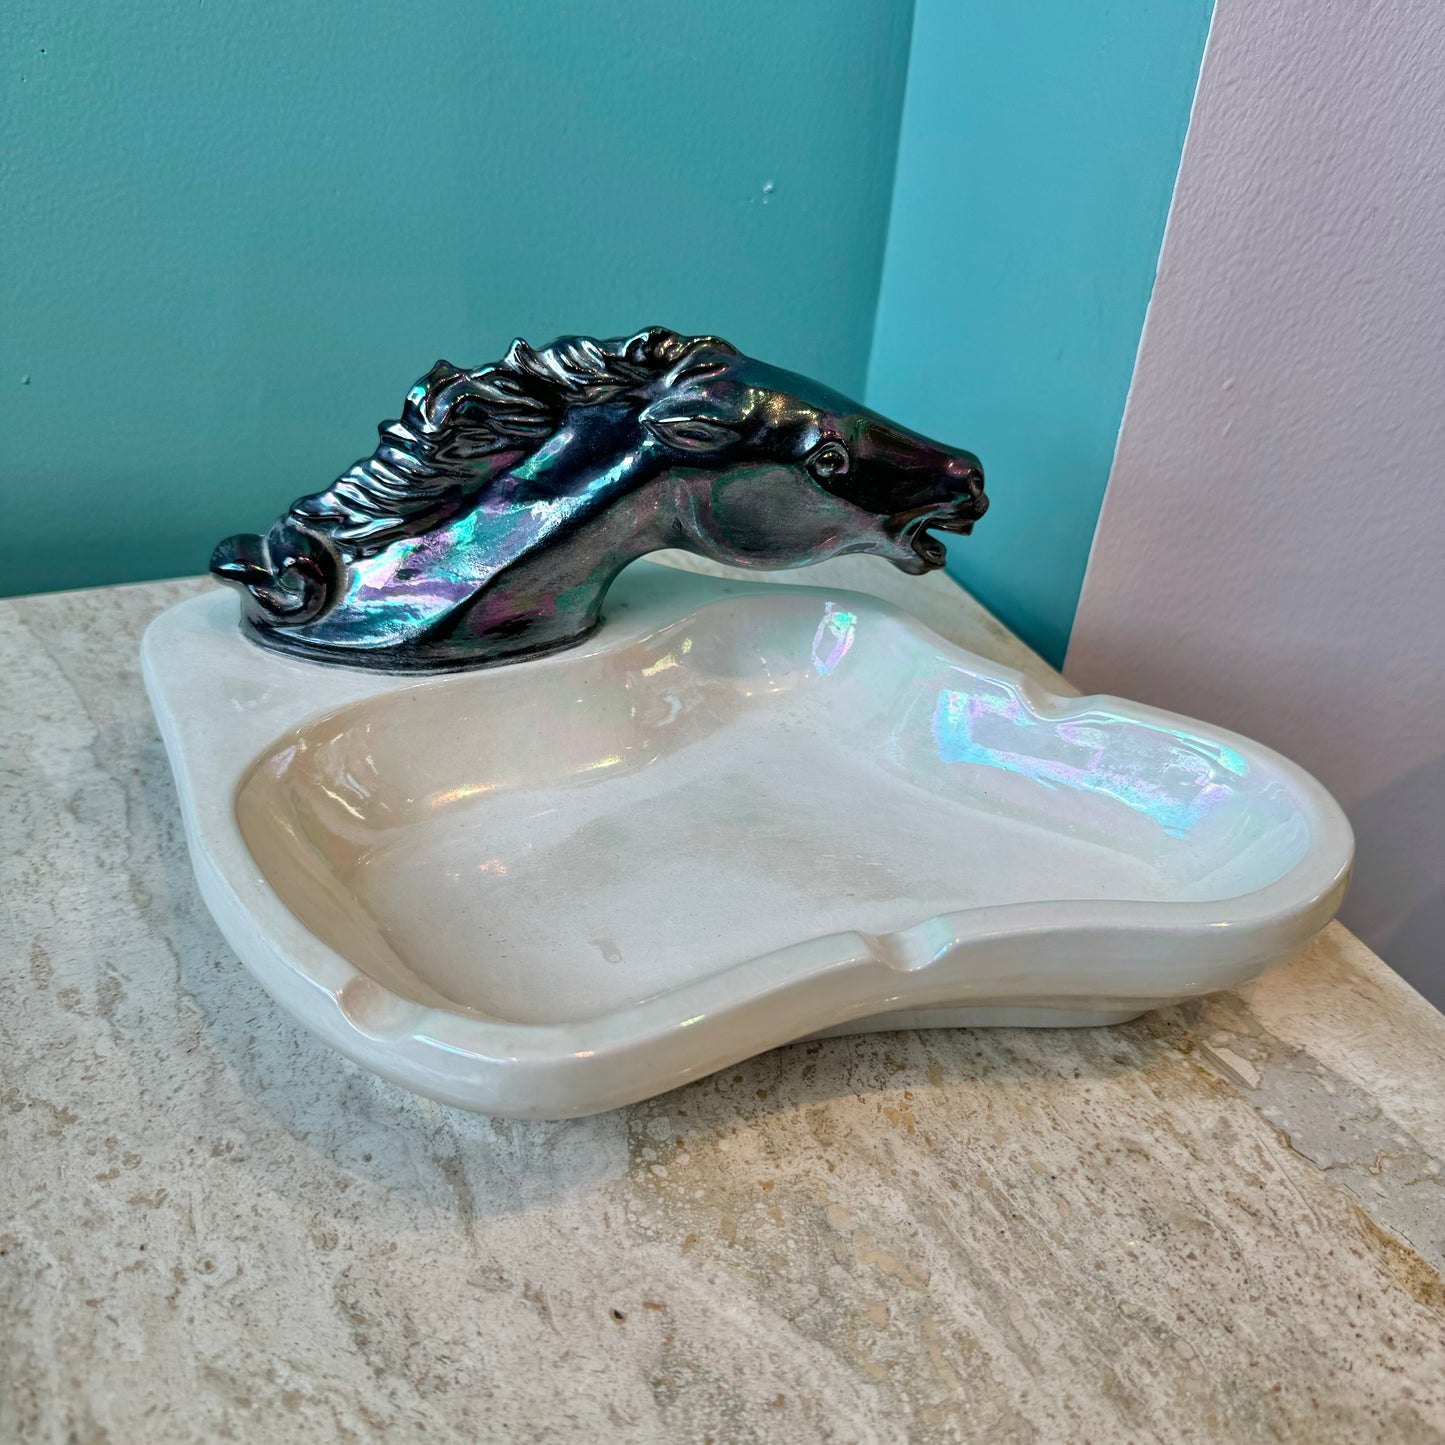 1976 Black Opalescent Horse Ashtray/Catchall Bowl